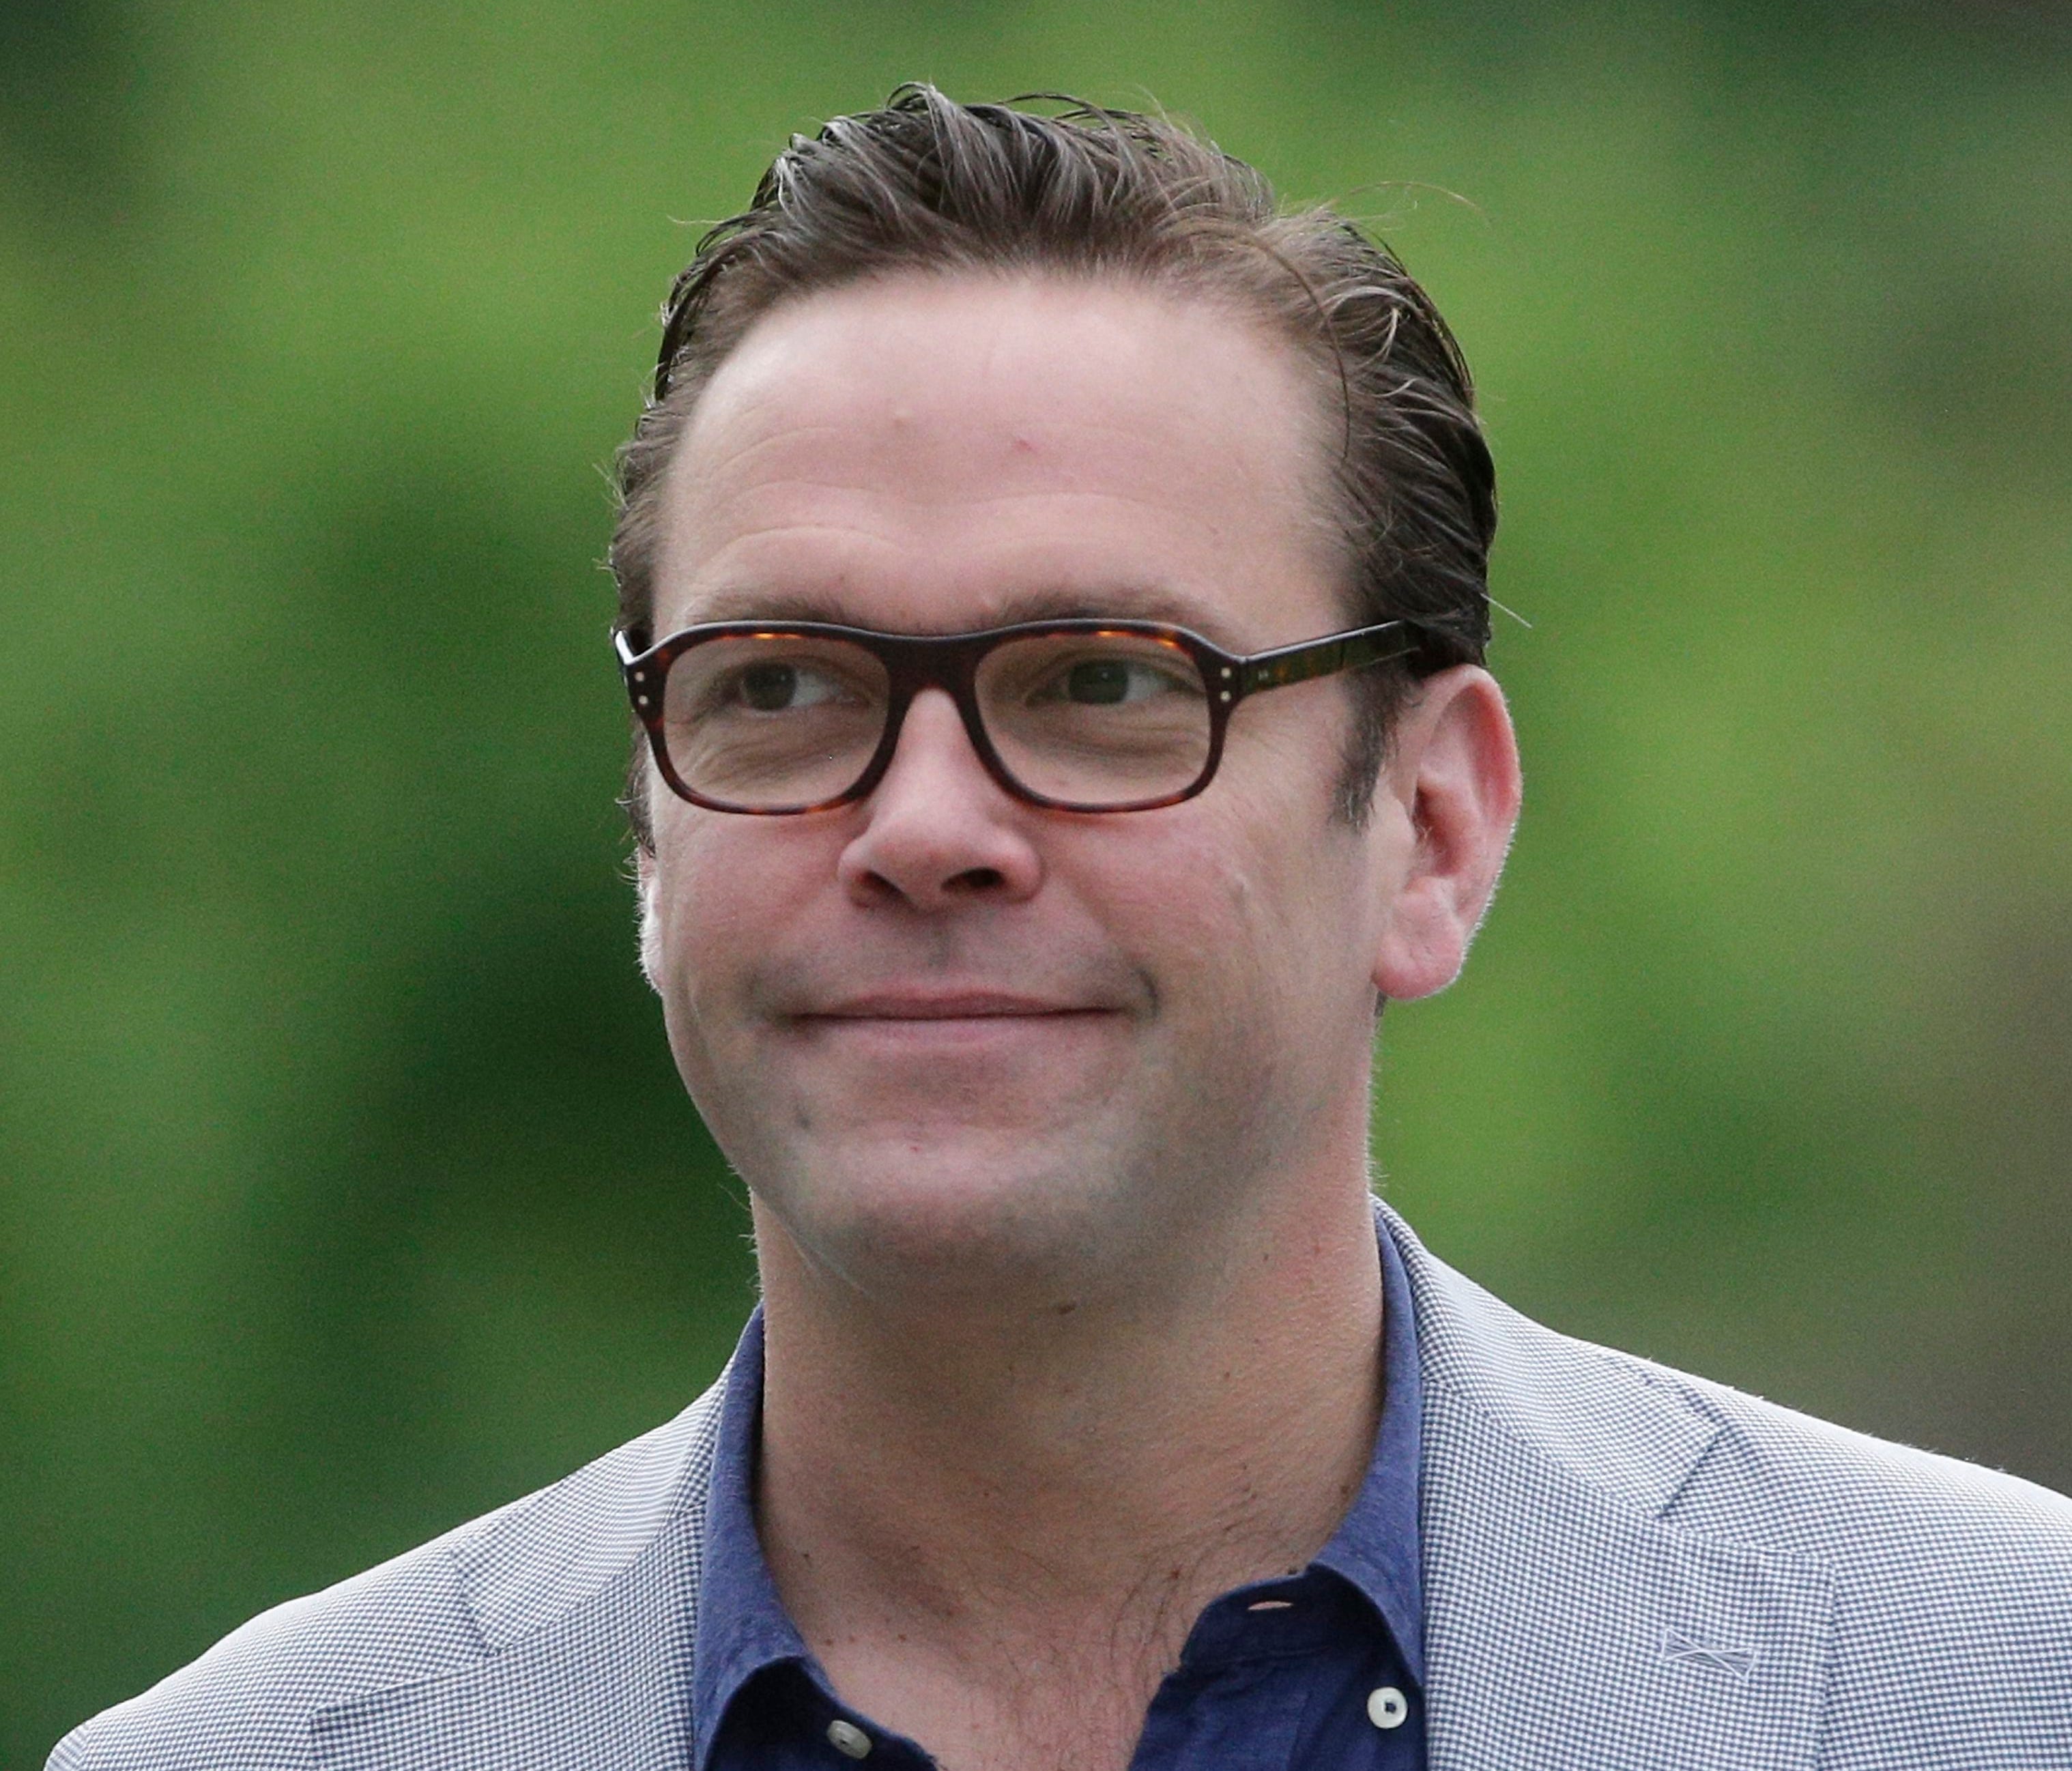 CEO of 21st Centruy Fox, James Murdoch said that NFL ratings are down because of an overproliferation of football.